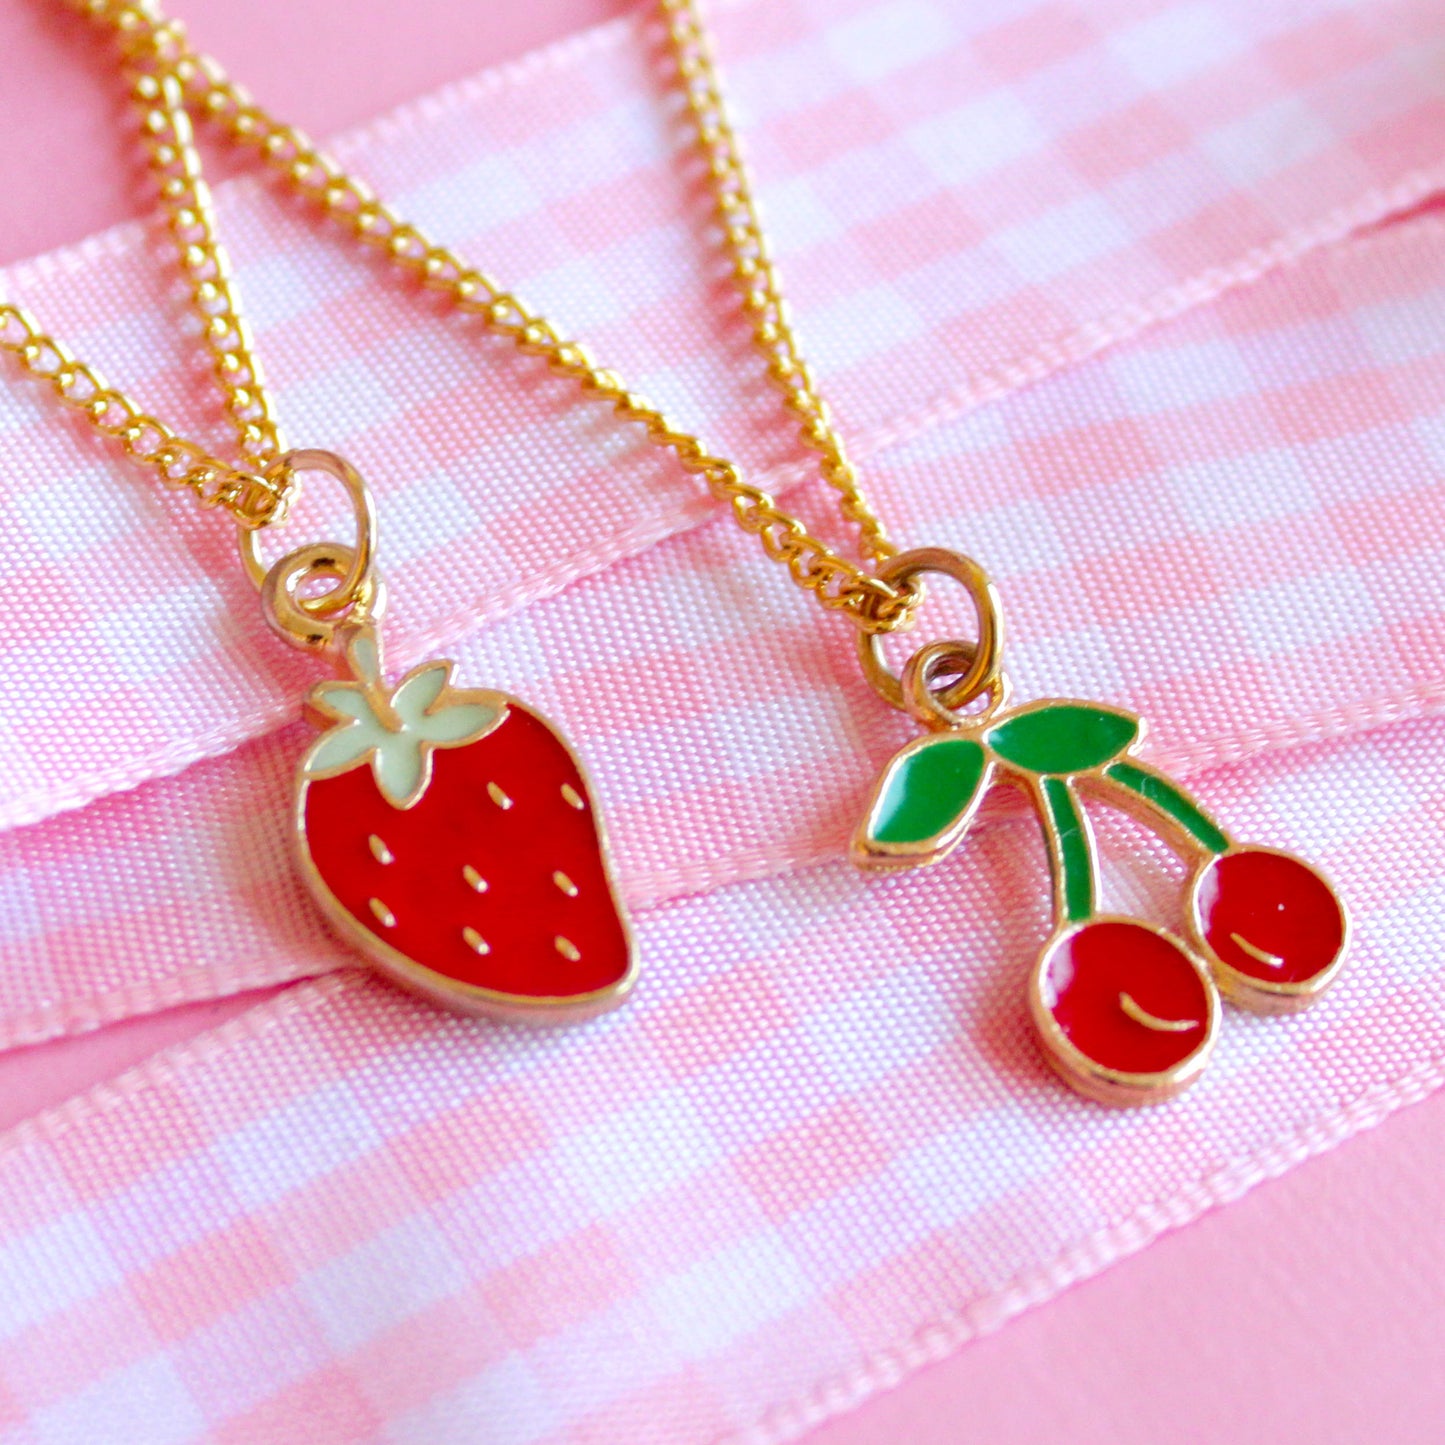 Vintage Fruit Charm Necklaces - Strawberry or Cherry